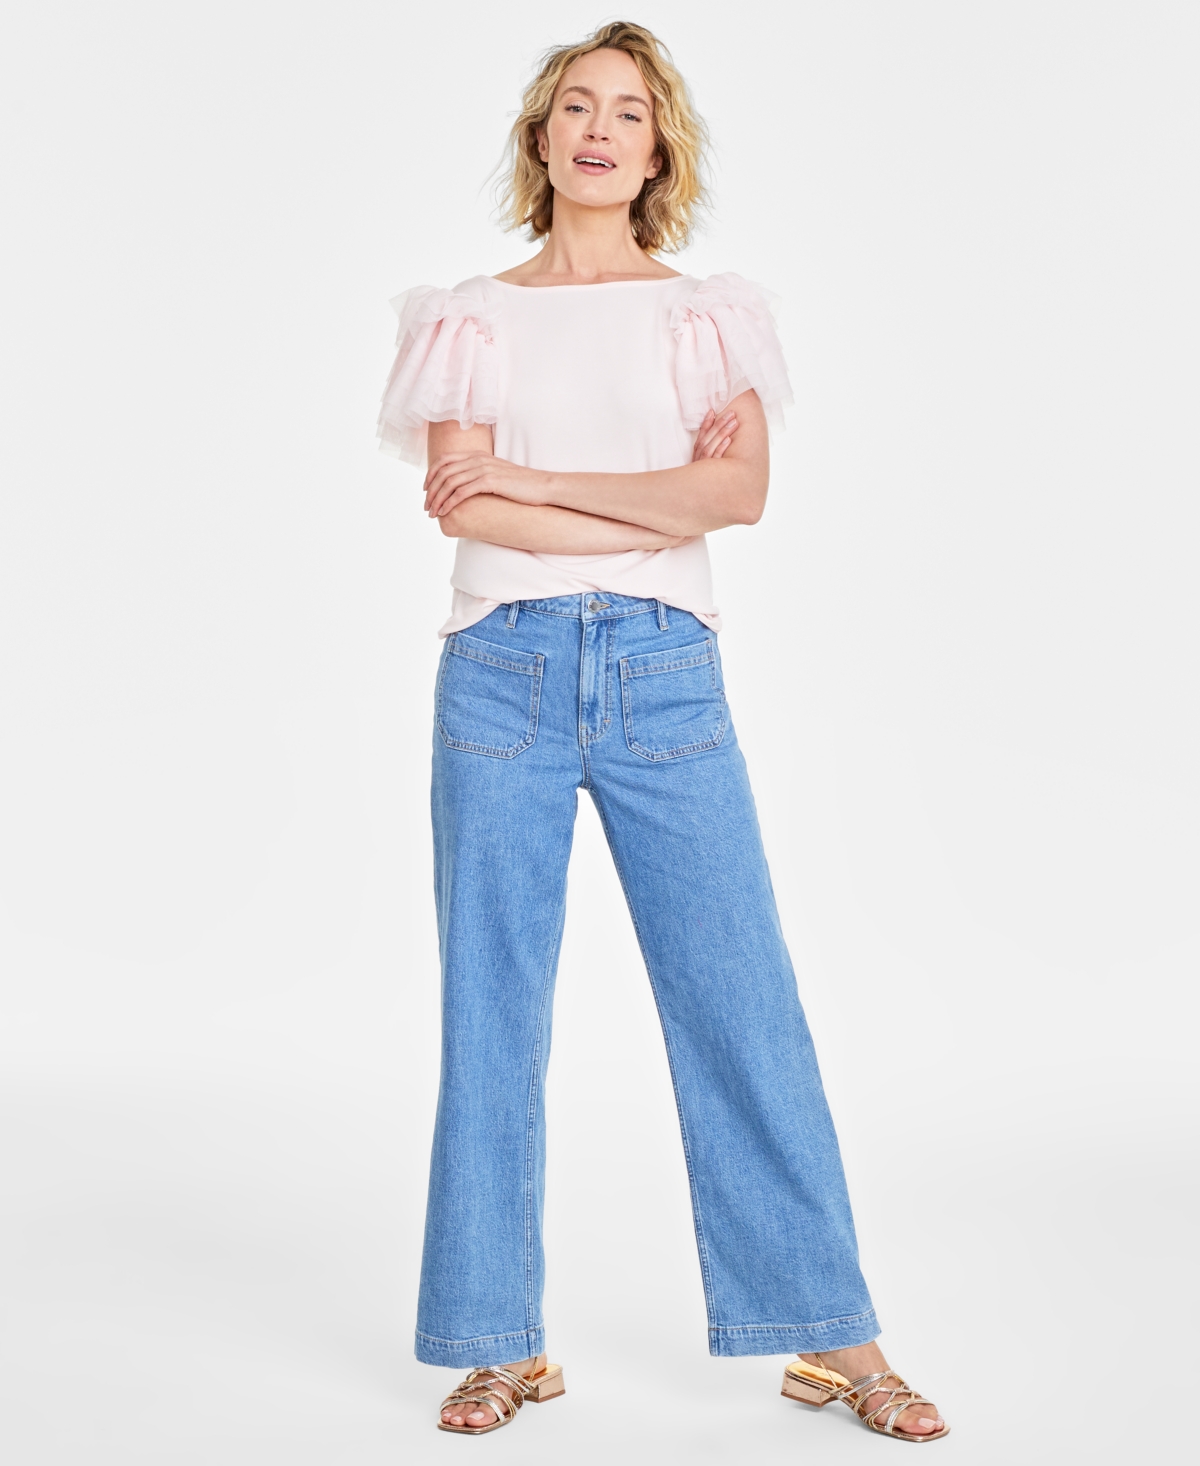 On 34th Womens Ruffle Sleeve Top Patch Pocket Wide Leg Jeans Stackable Bracelets Created For Macys In Med Indigo